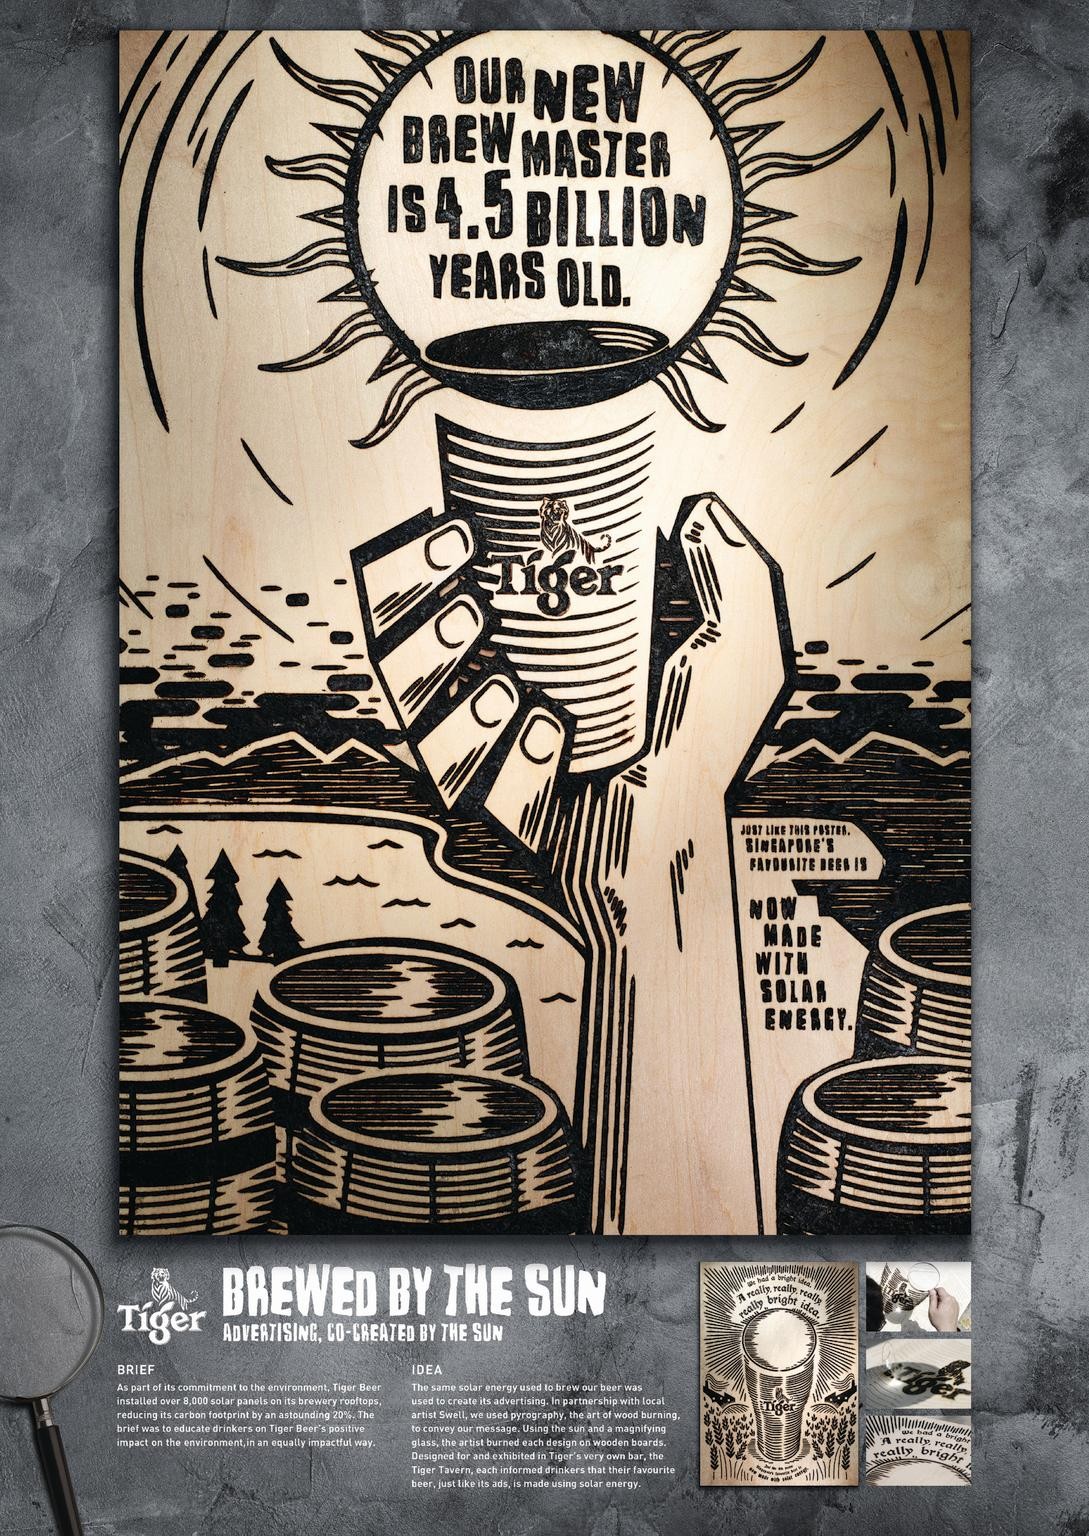 Brewed By The Sun - Brewmaster/Bright Idea